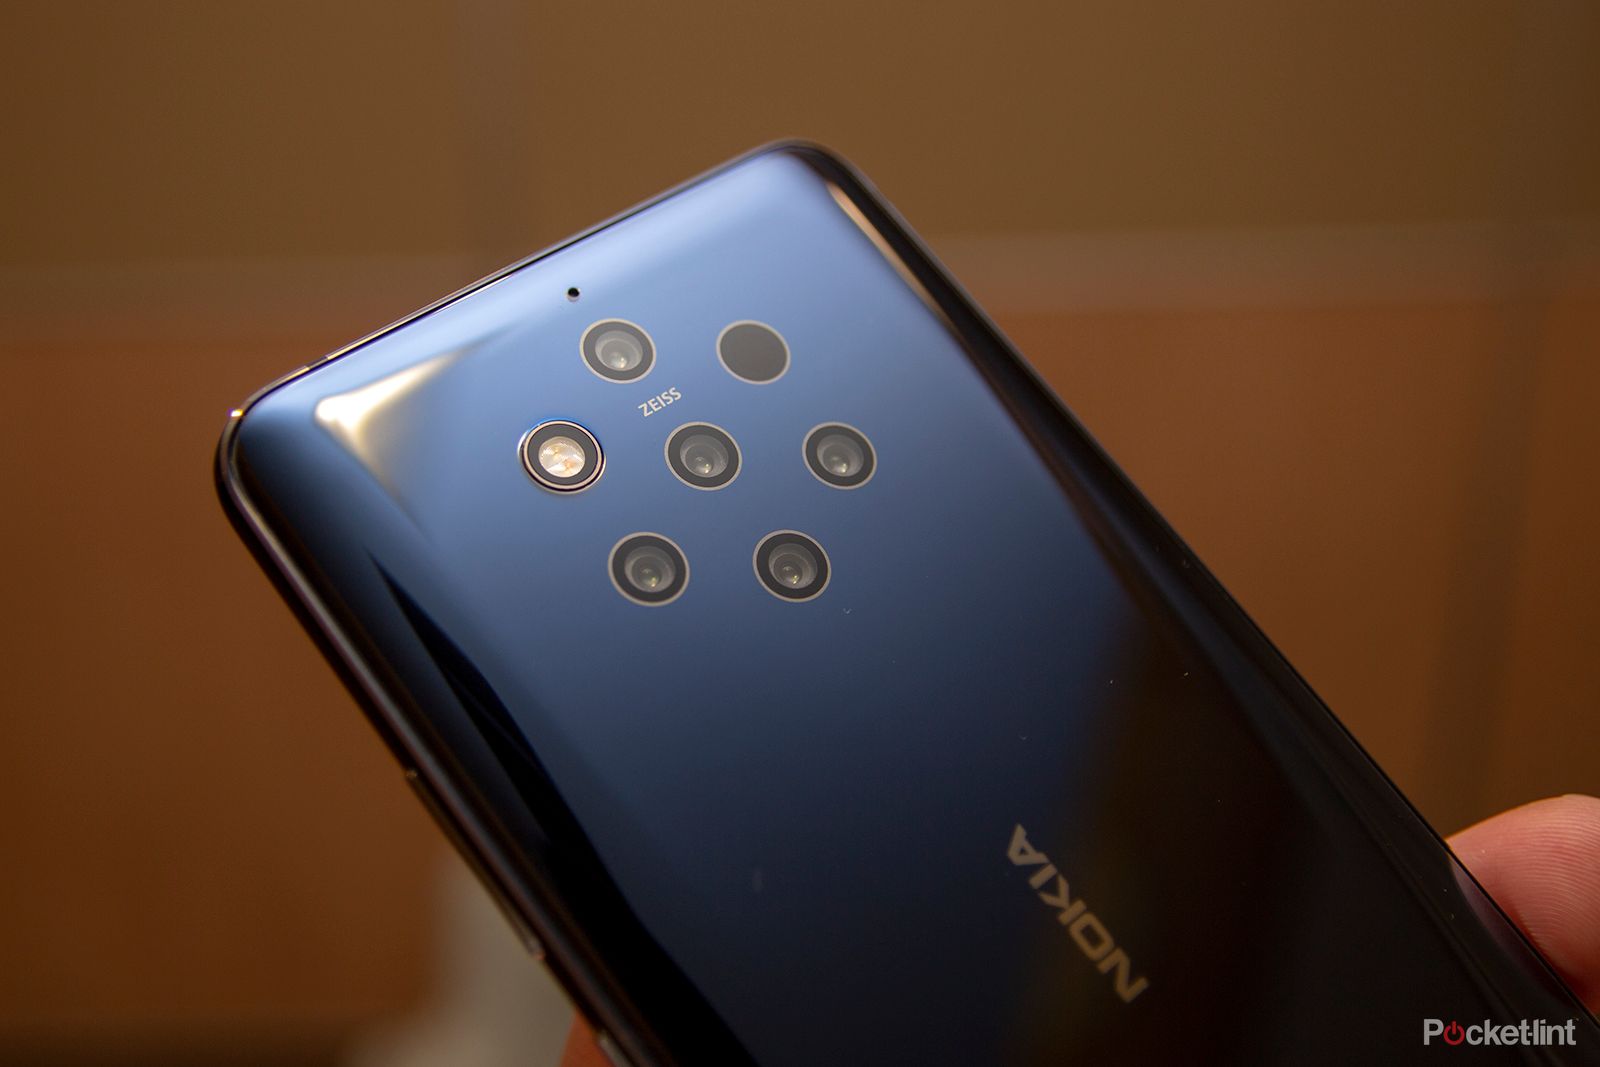 All I care about is that you take a picture and find its stunning Juho Sarvikas on the Nokia 9 PureView image 1